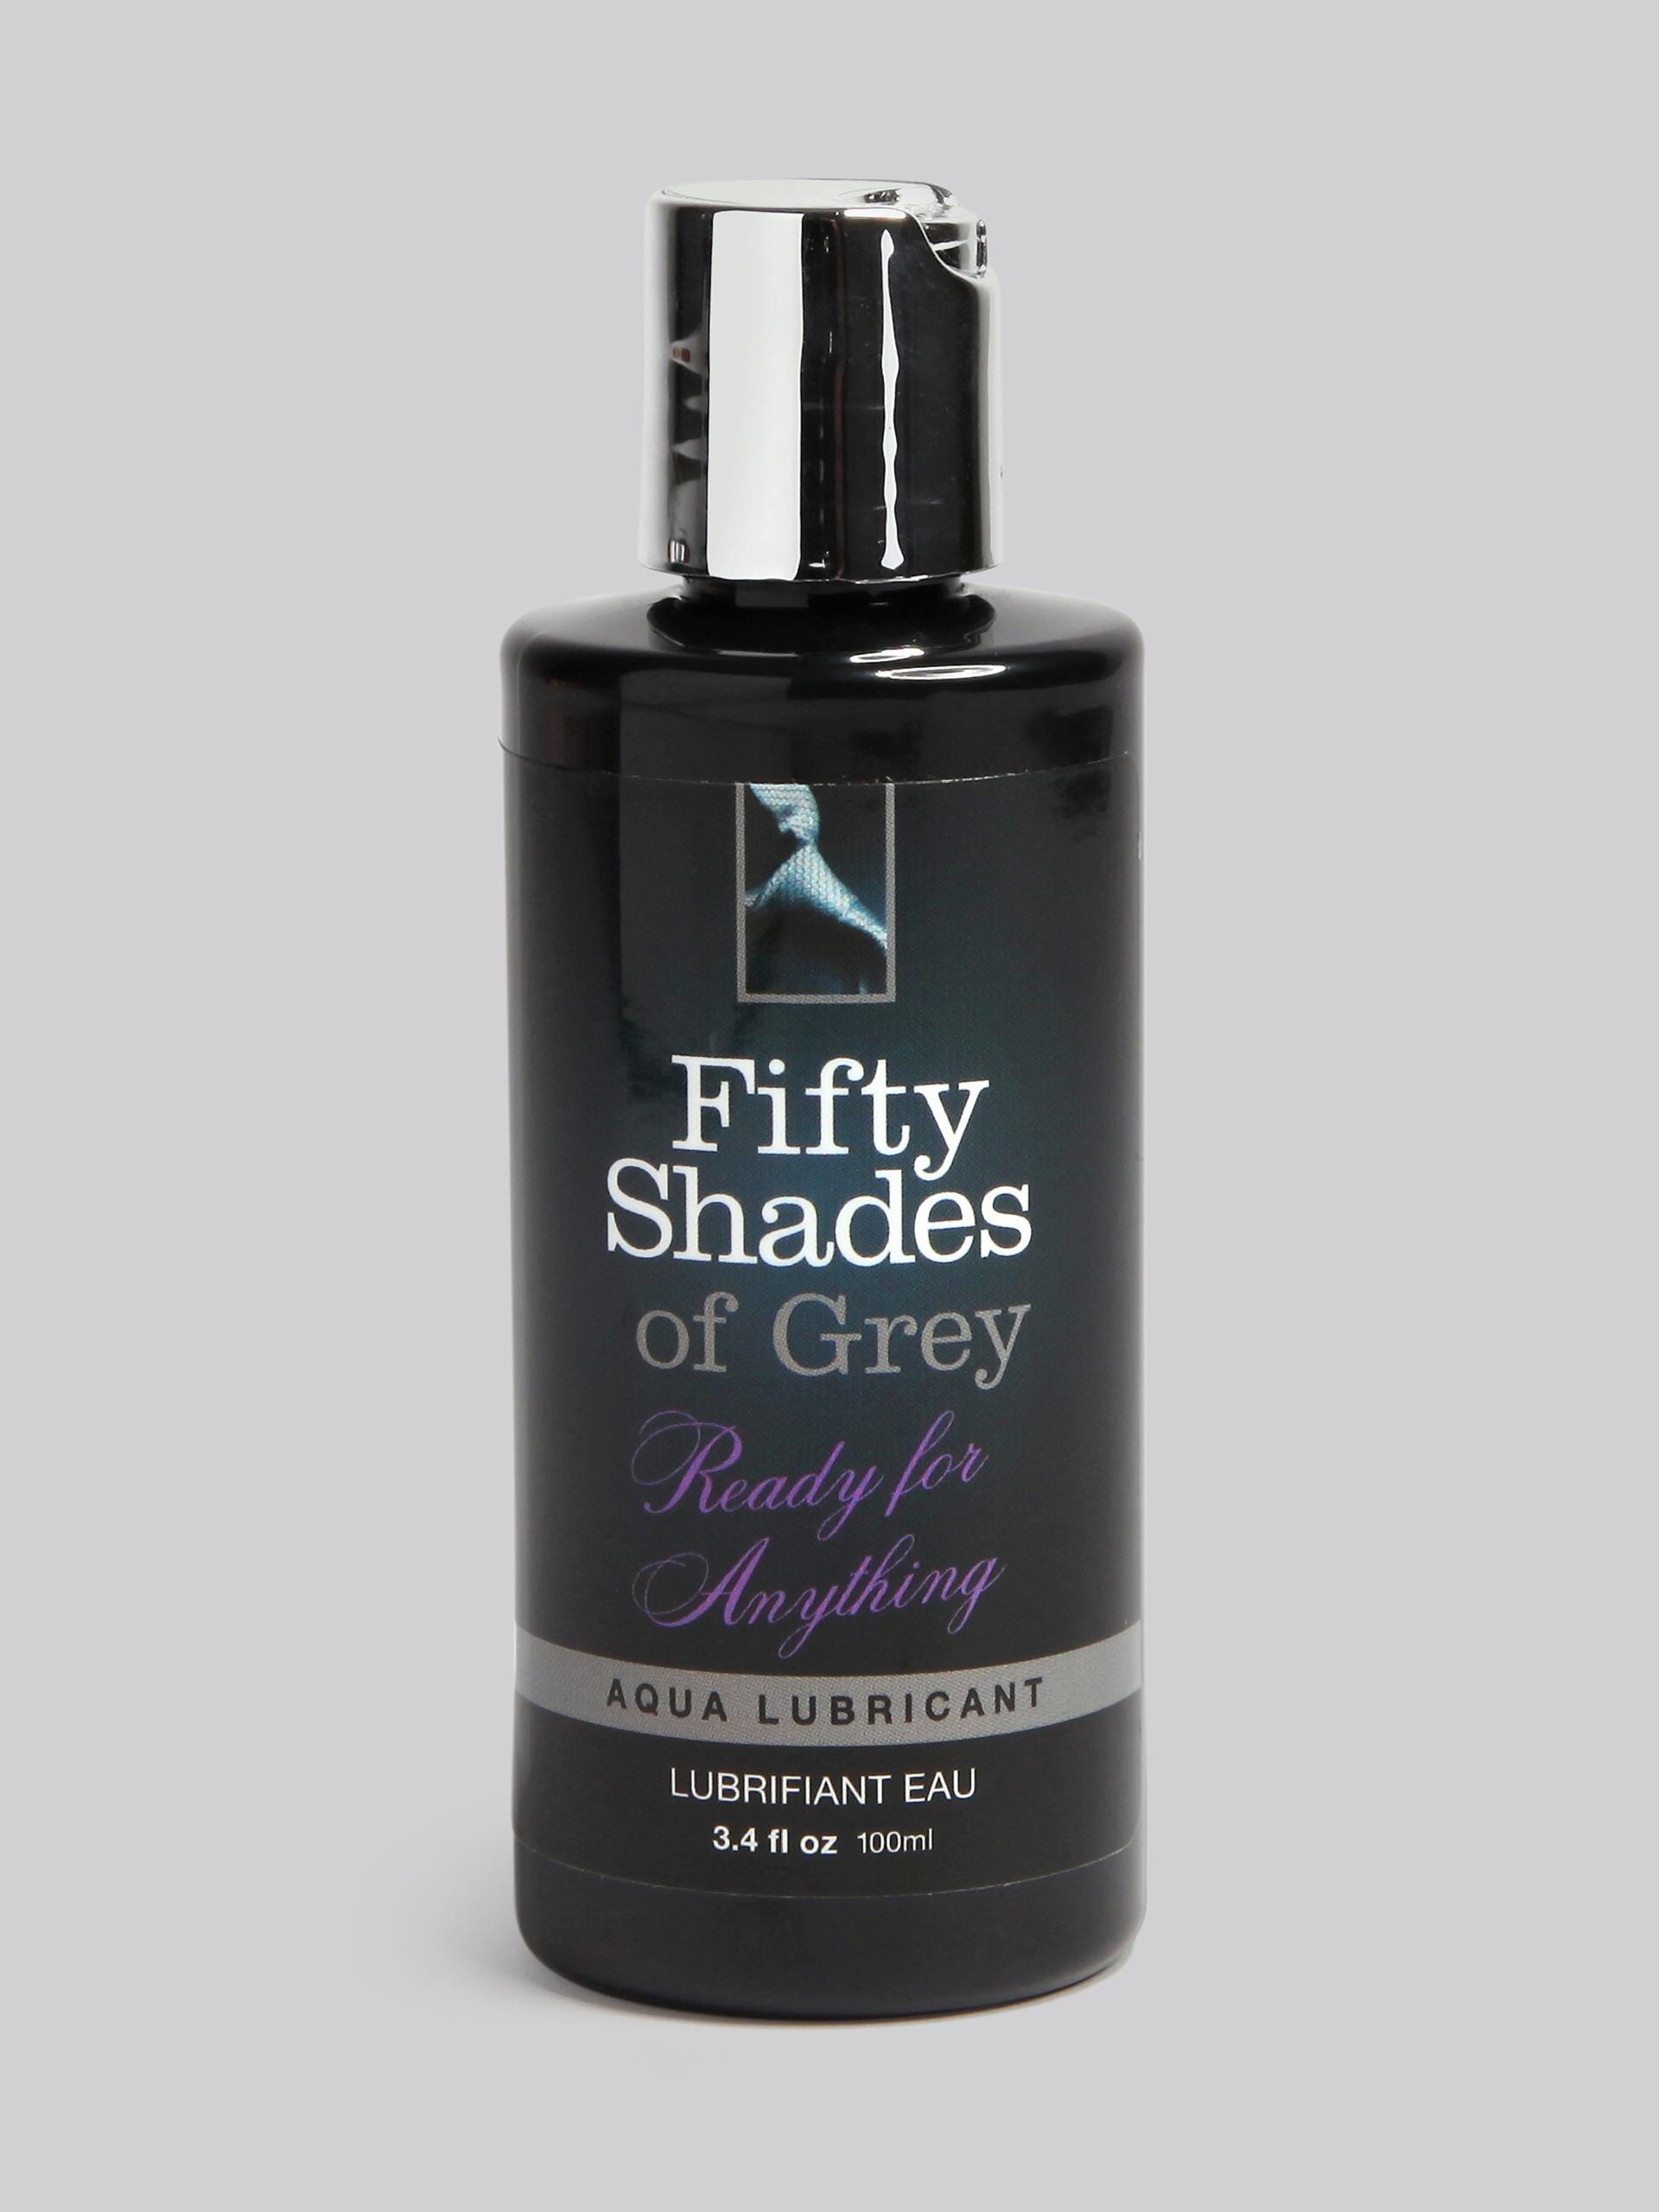 Fifty-Shades-of-Grey Ready for Anything Water based lubricant